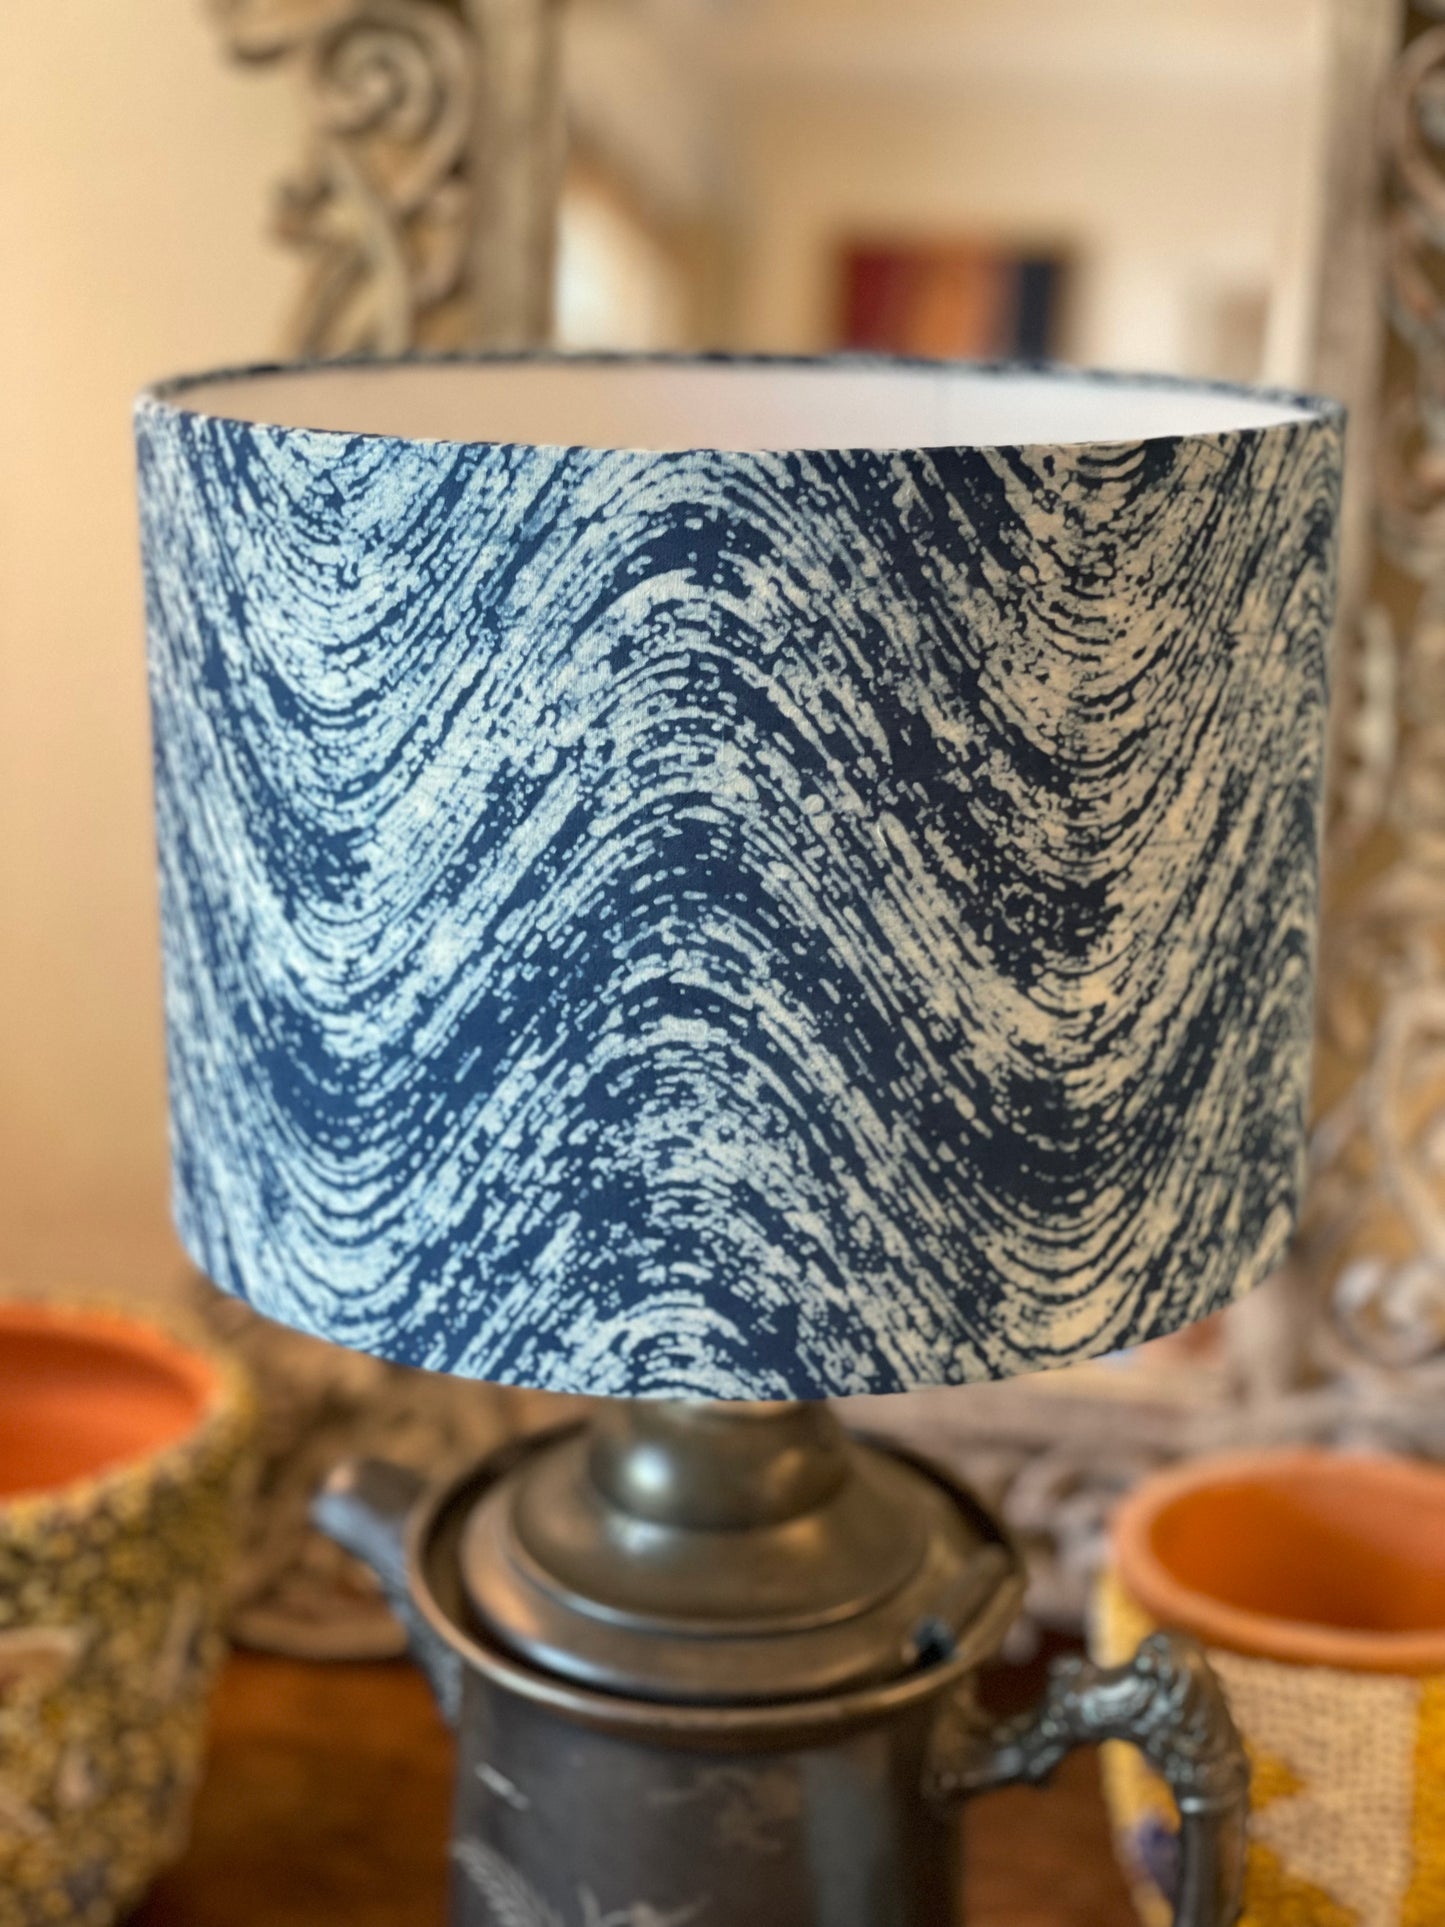 10 inch Drum Lampshade. Indigo Batik from India. Blue and White Wavy Combed Pattern.